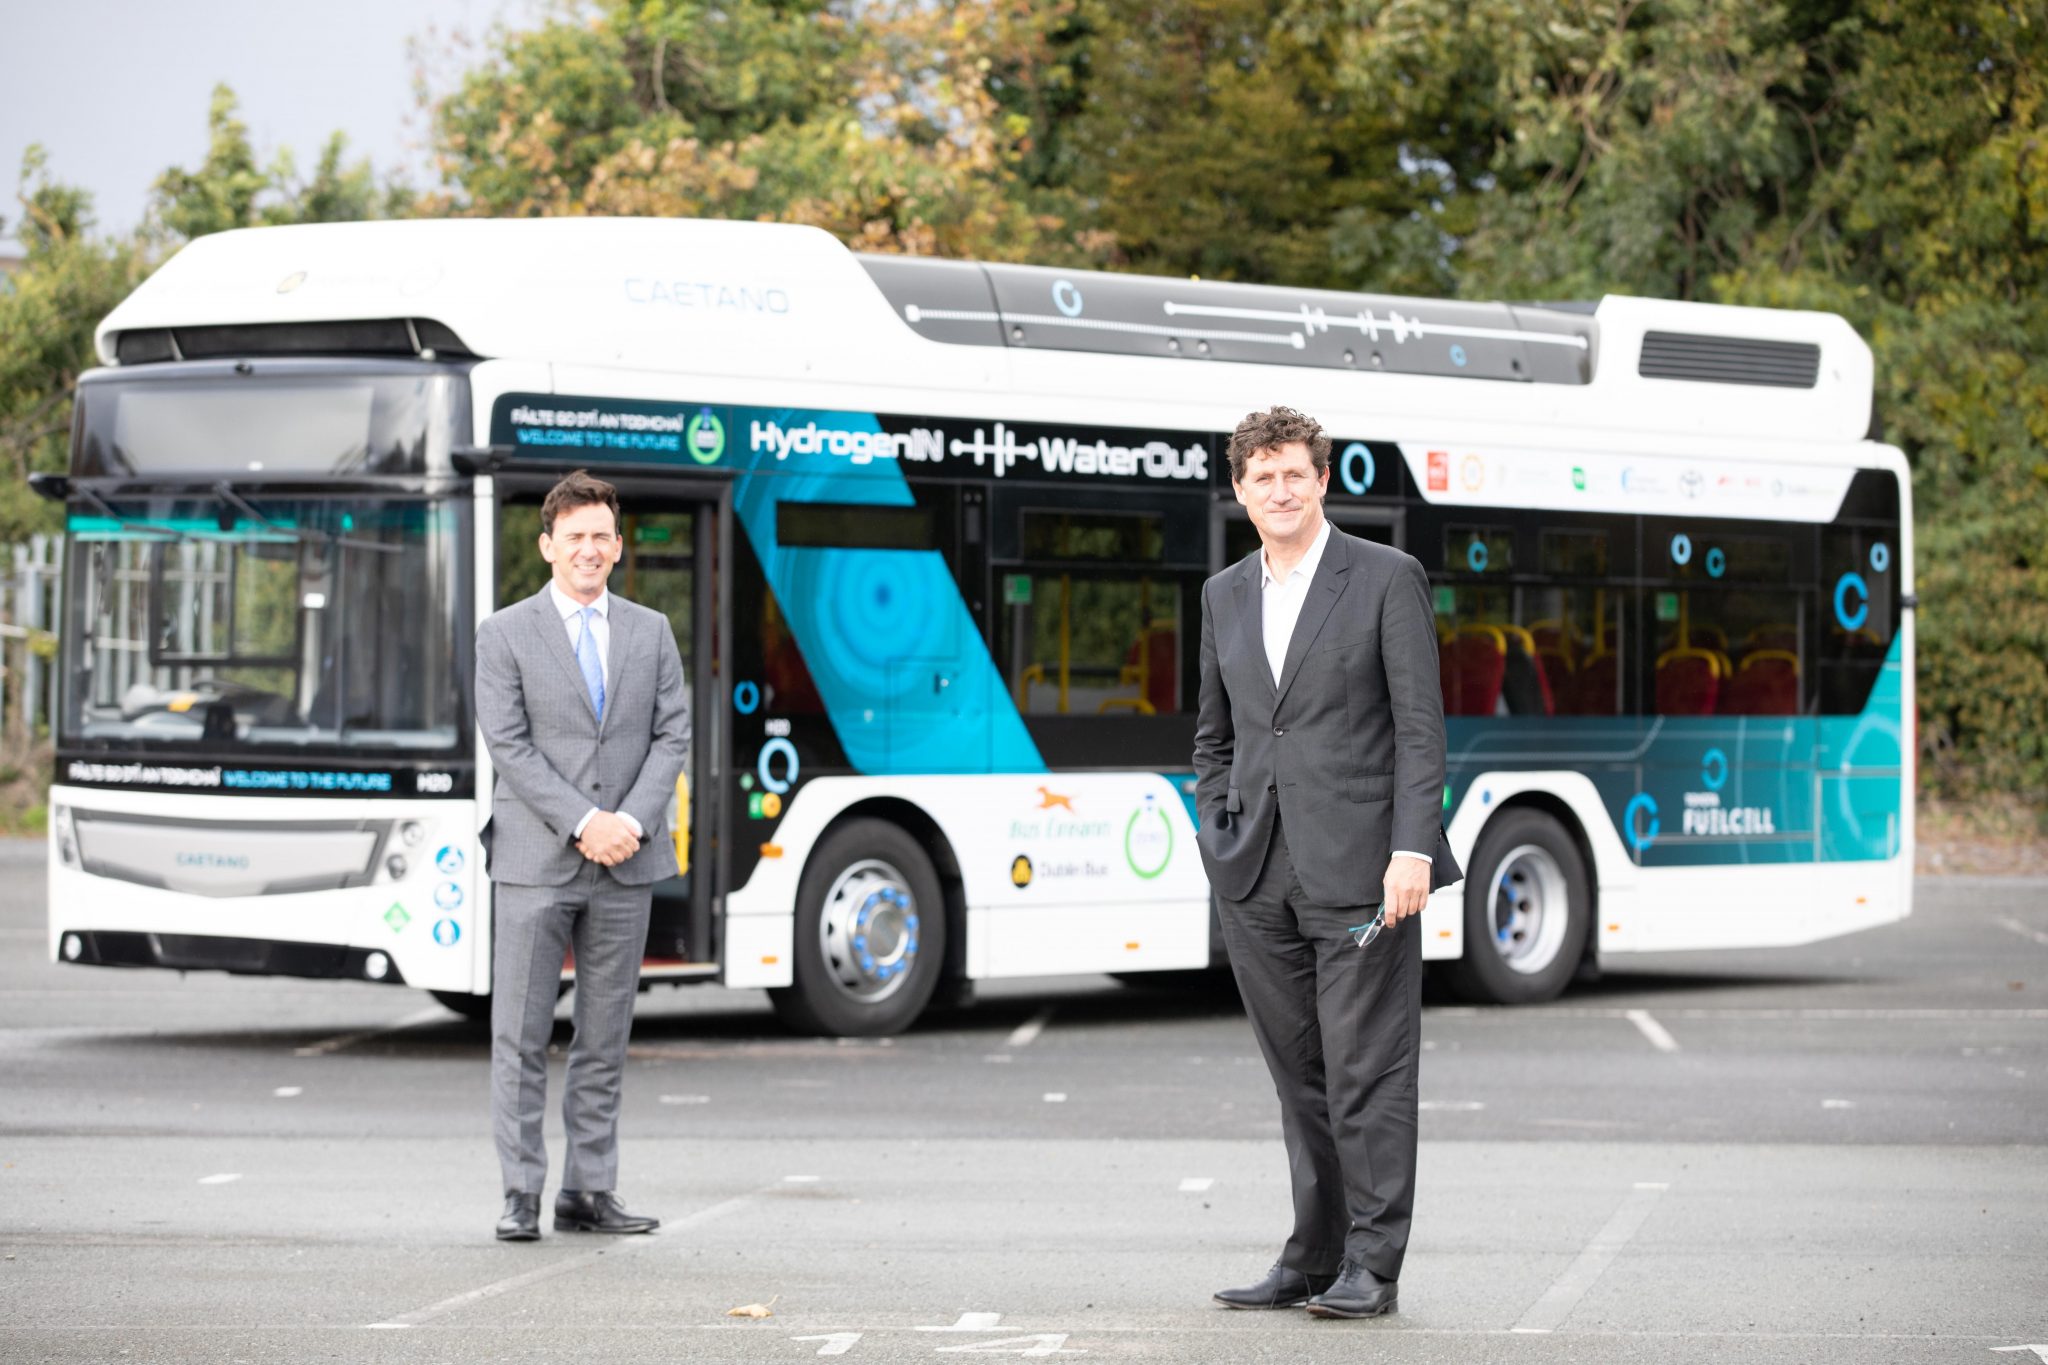 Minister for Climate Action, Communication Networks and Transport Eamon Ryan TD (R) and HMI member Steve Tormey chief executive, Toyota Ireland at the launch of Ireland's first hydrogen fuel cell bus trial